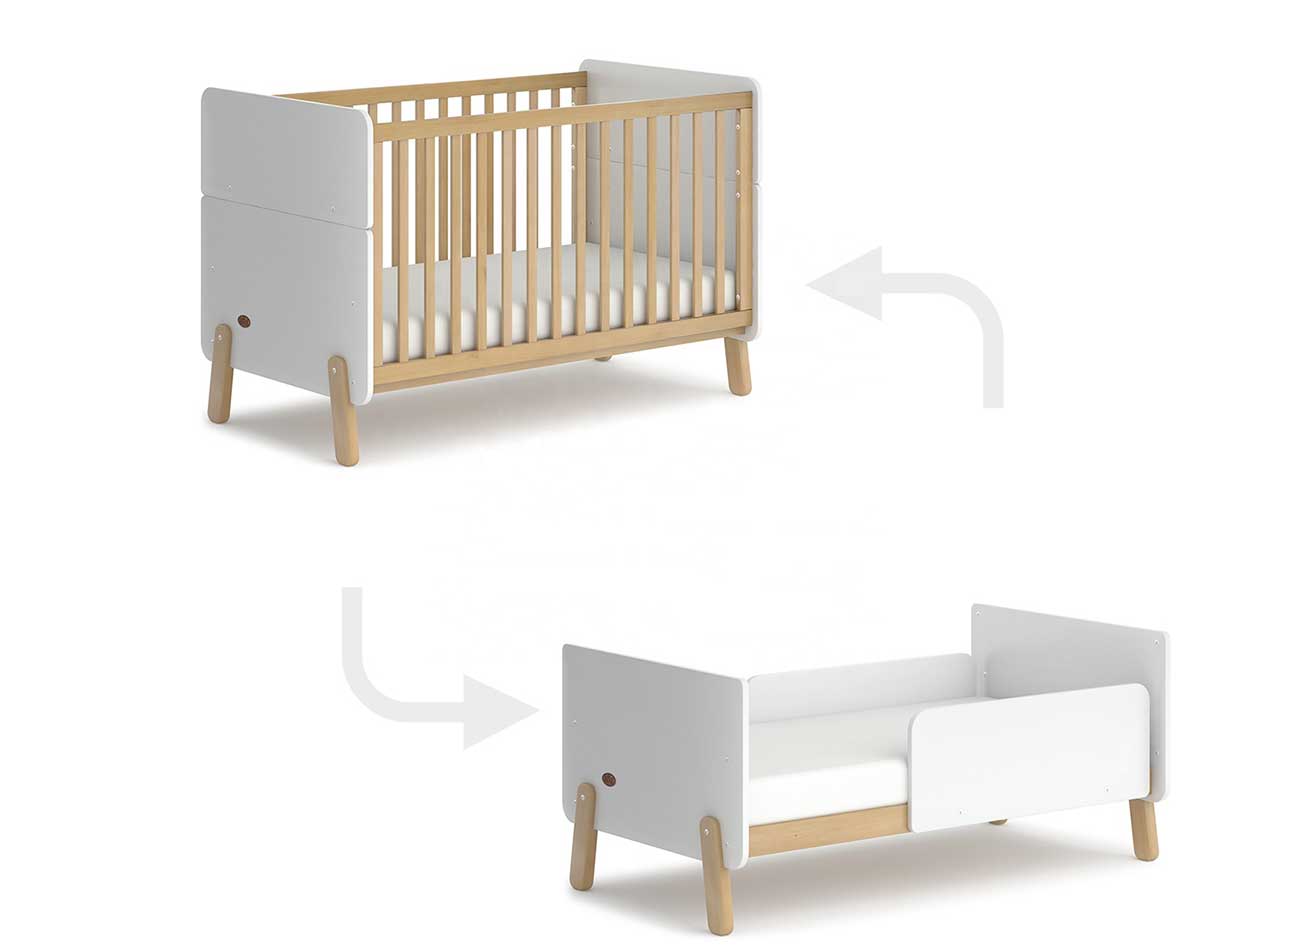 Beds_and_Crib